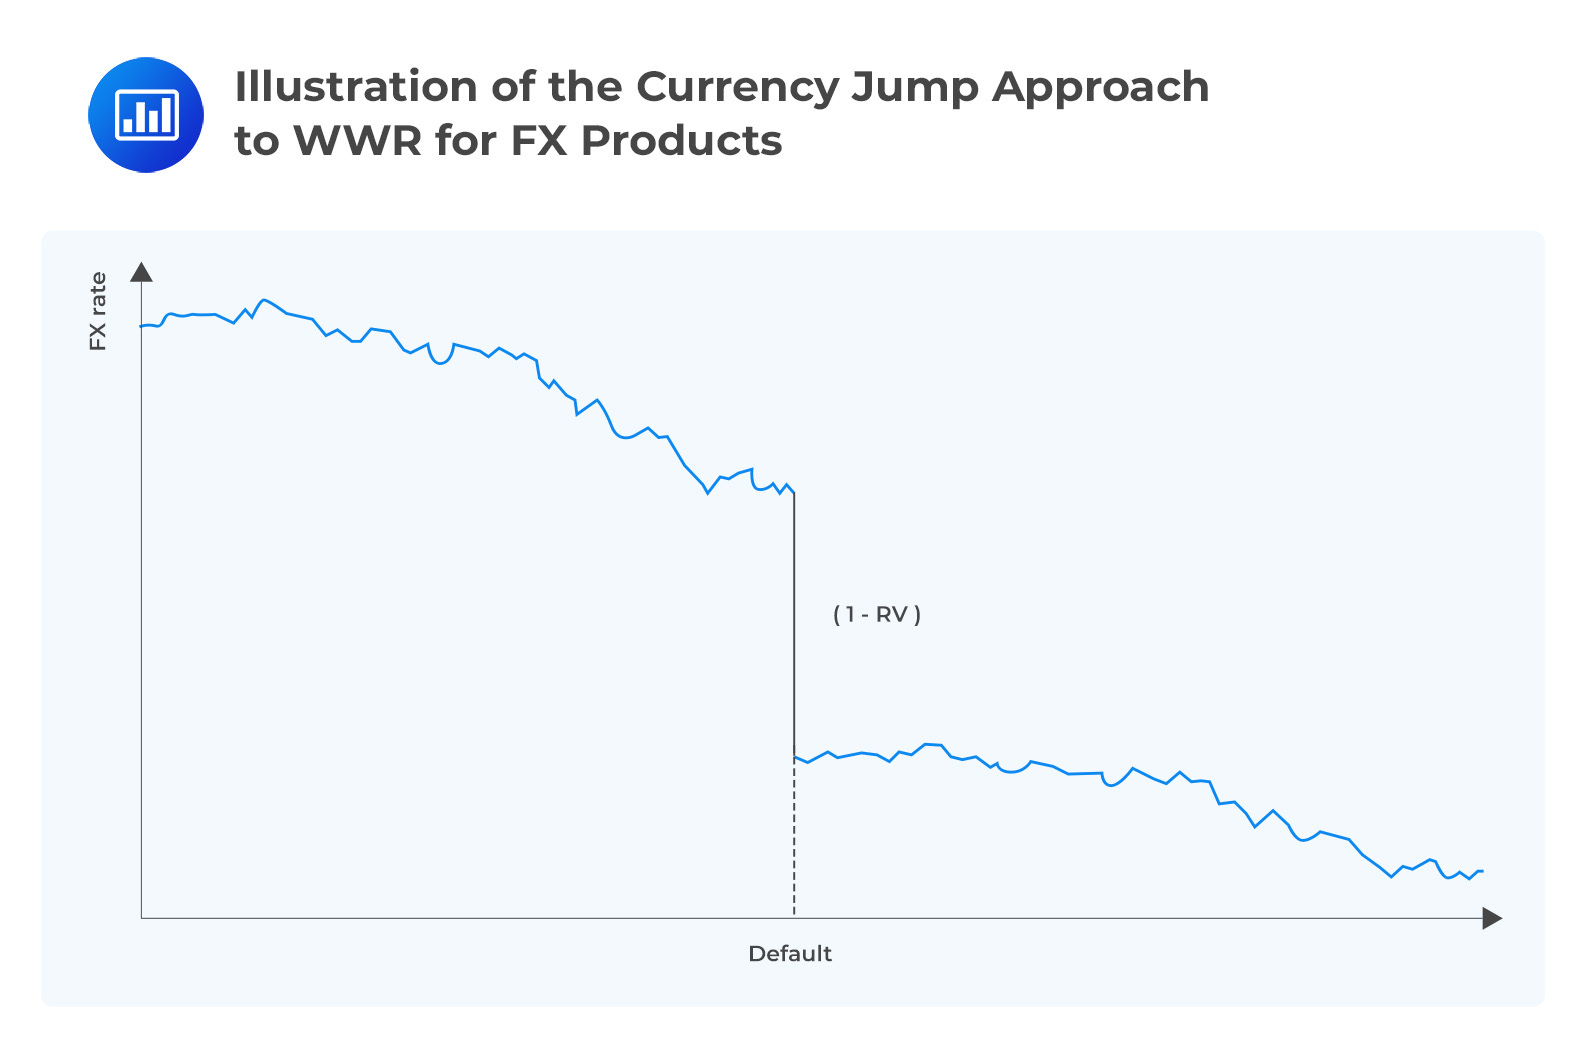 Illustration of the currency jump approach to WWR for FX products.